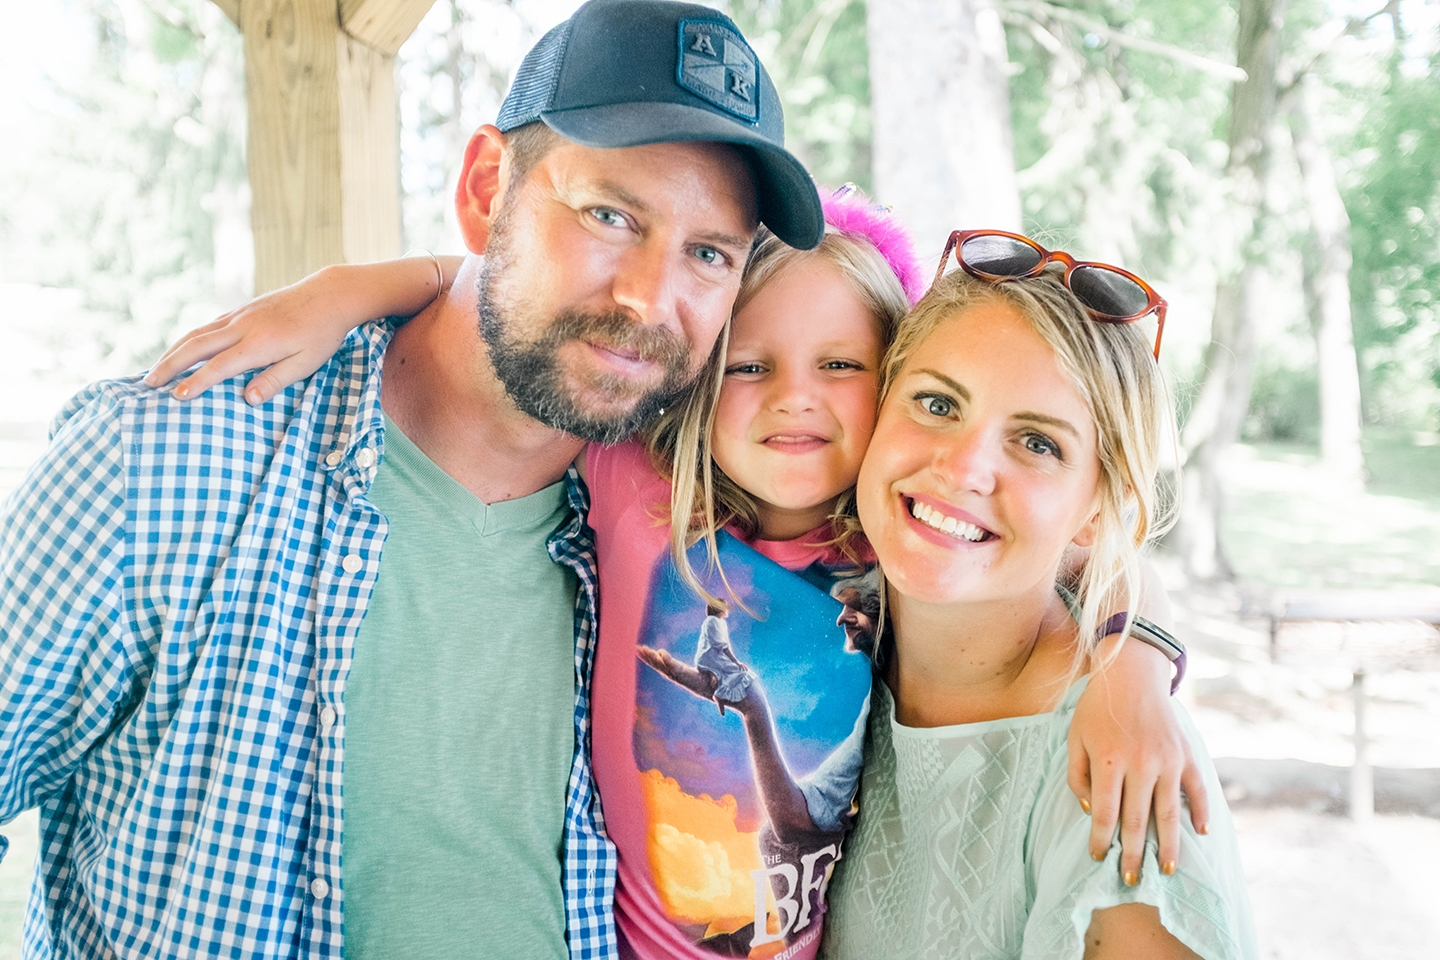 Amanda Garvin with her husband and daughter.